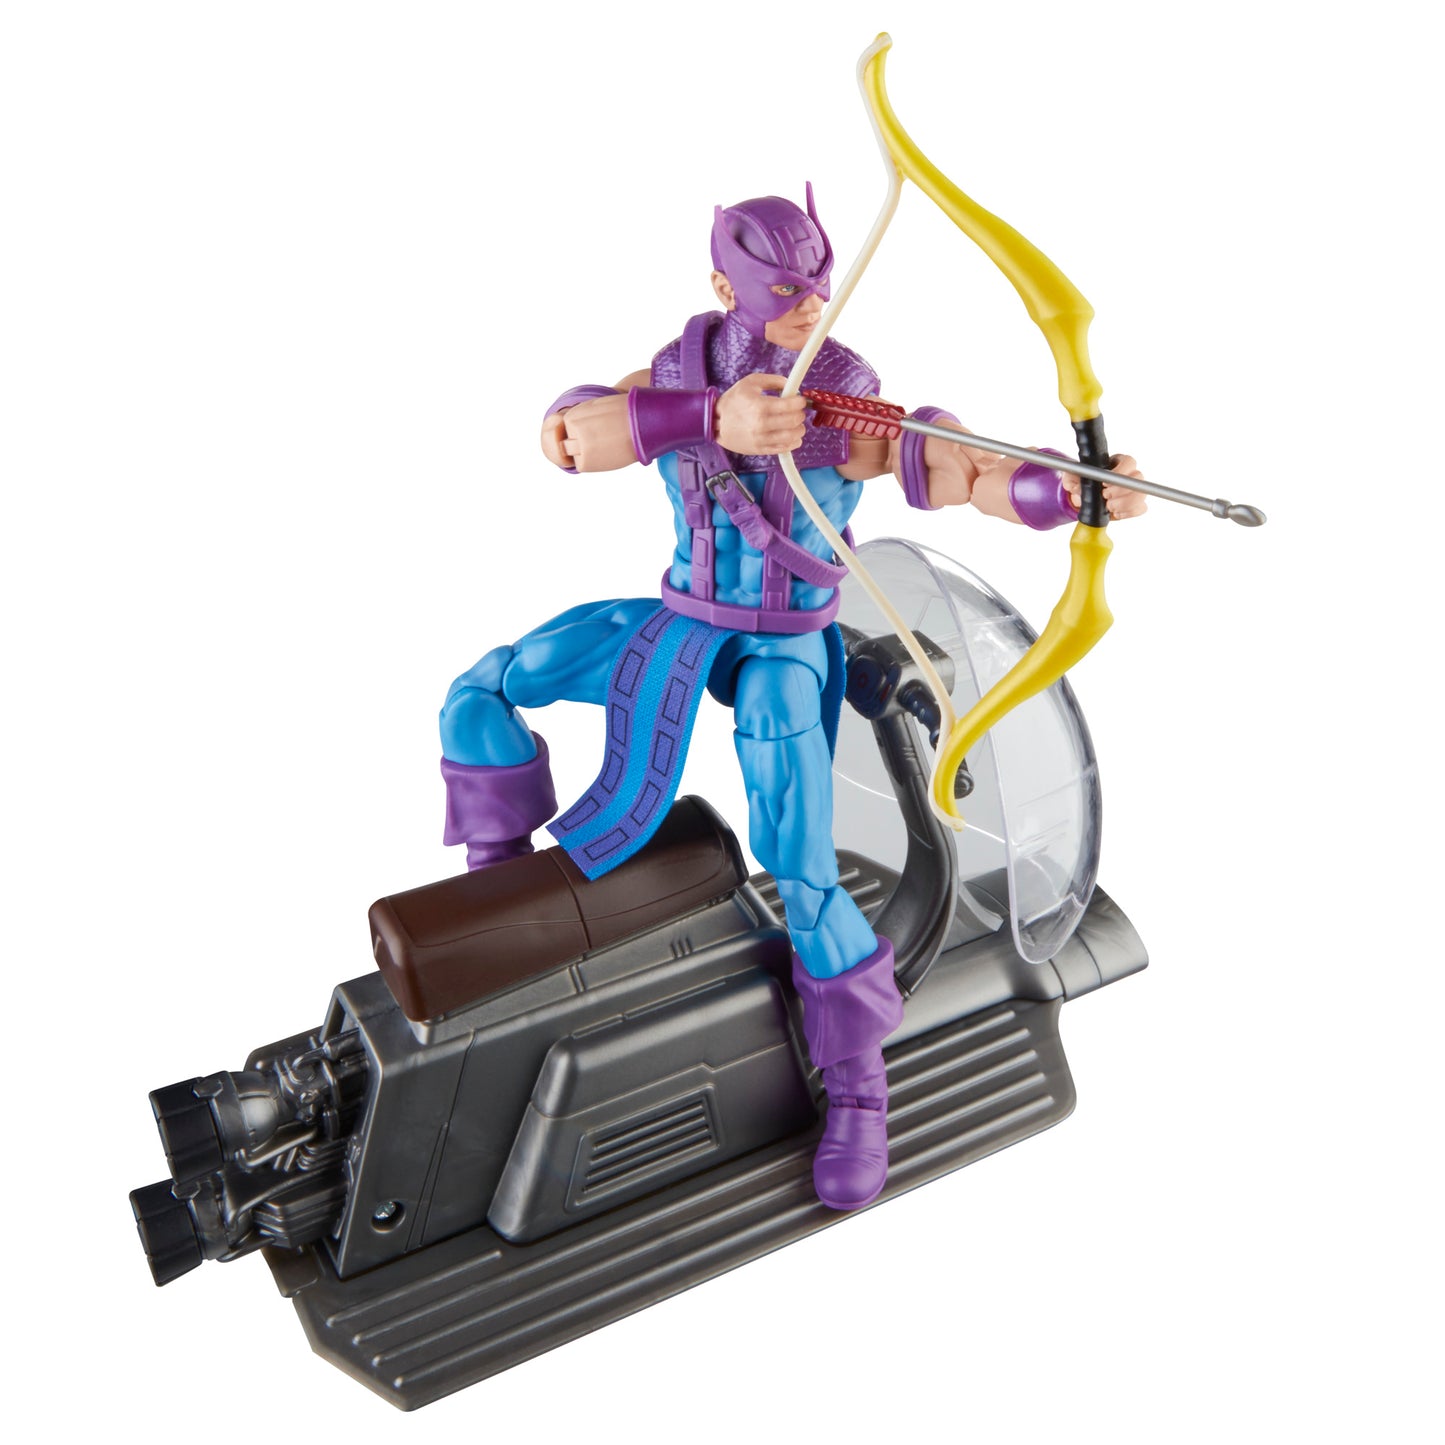 Marvel Legends Series Hawkeye with Sky-Cycle Action Figure Toy - Heretoserveyou